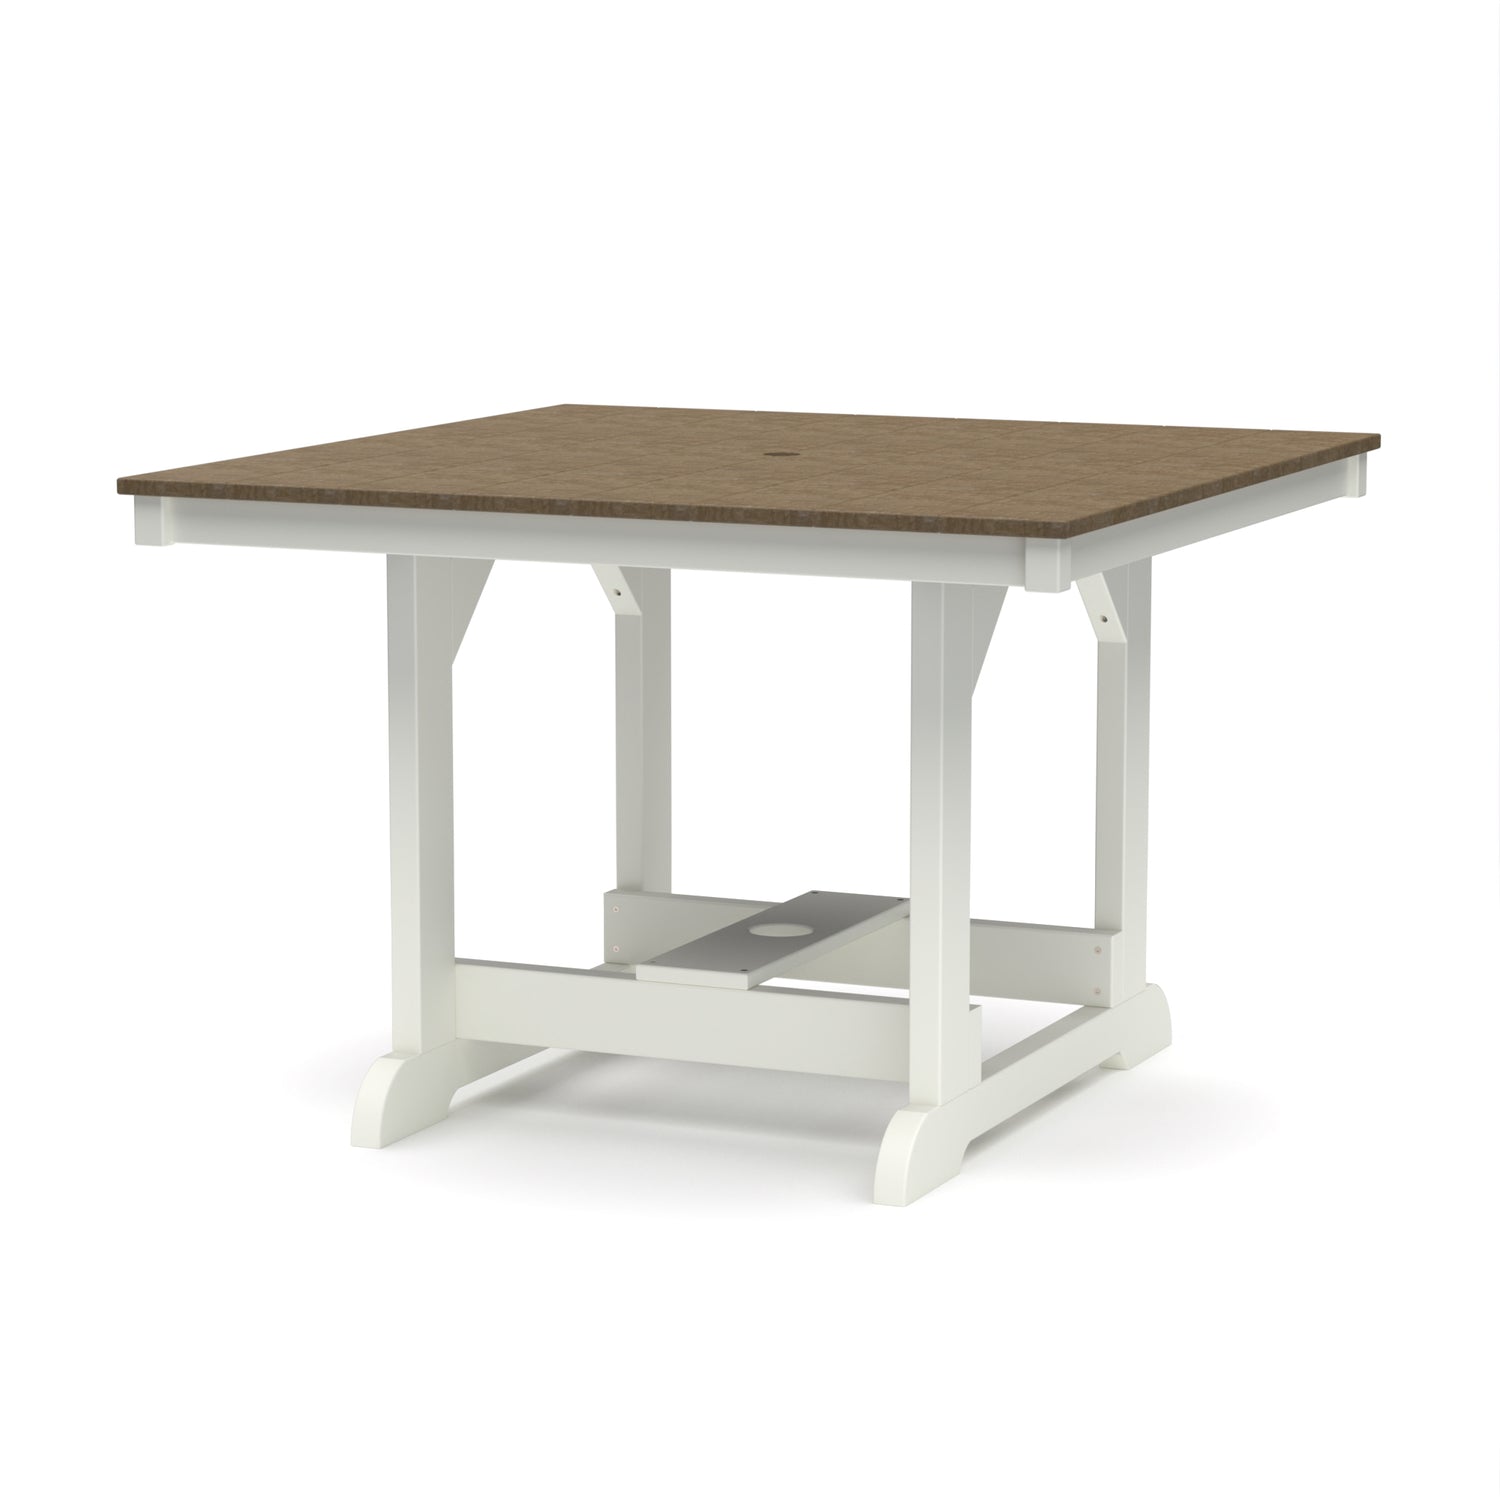 Wildridge Recycled Plastic Heritage Dining Table Collection